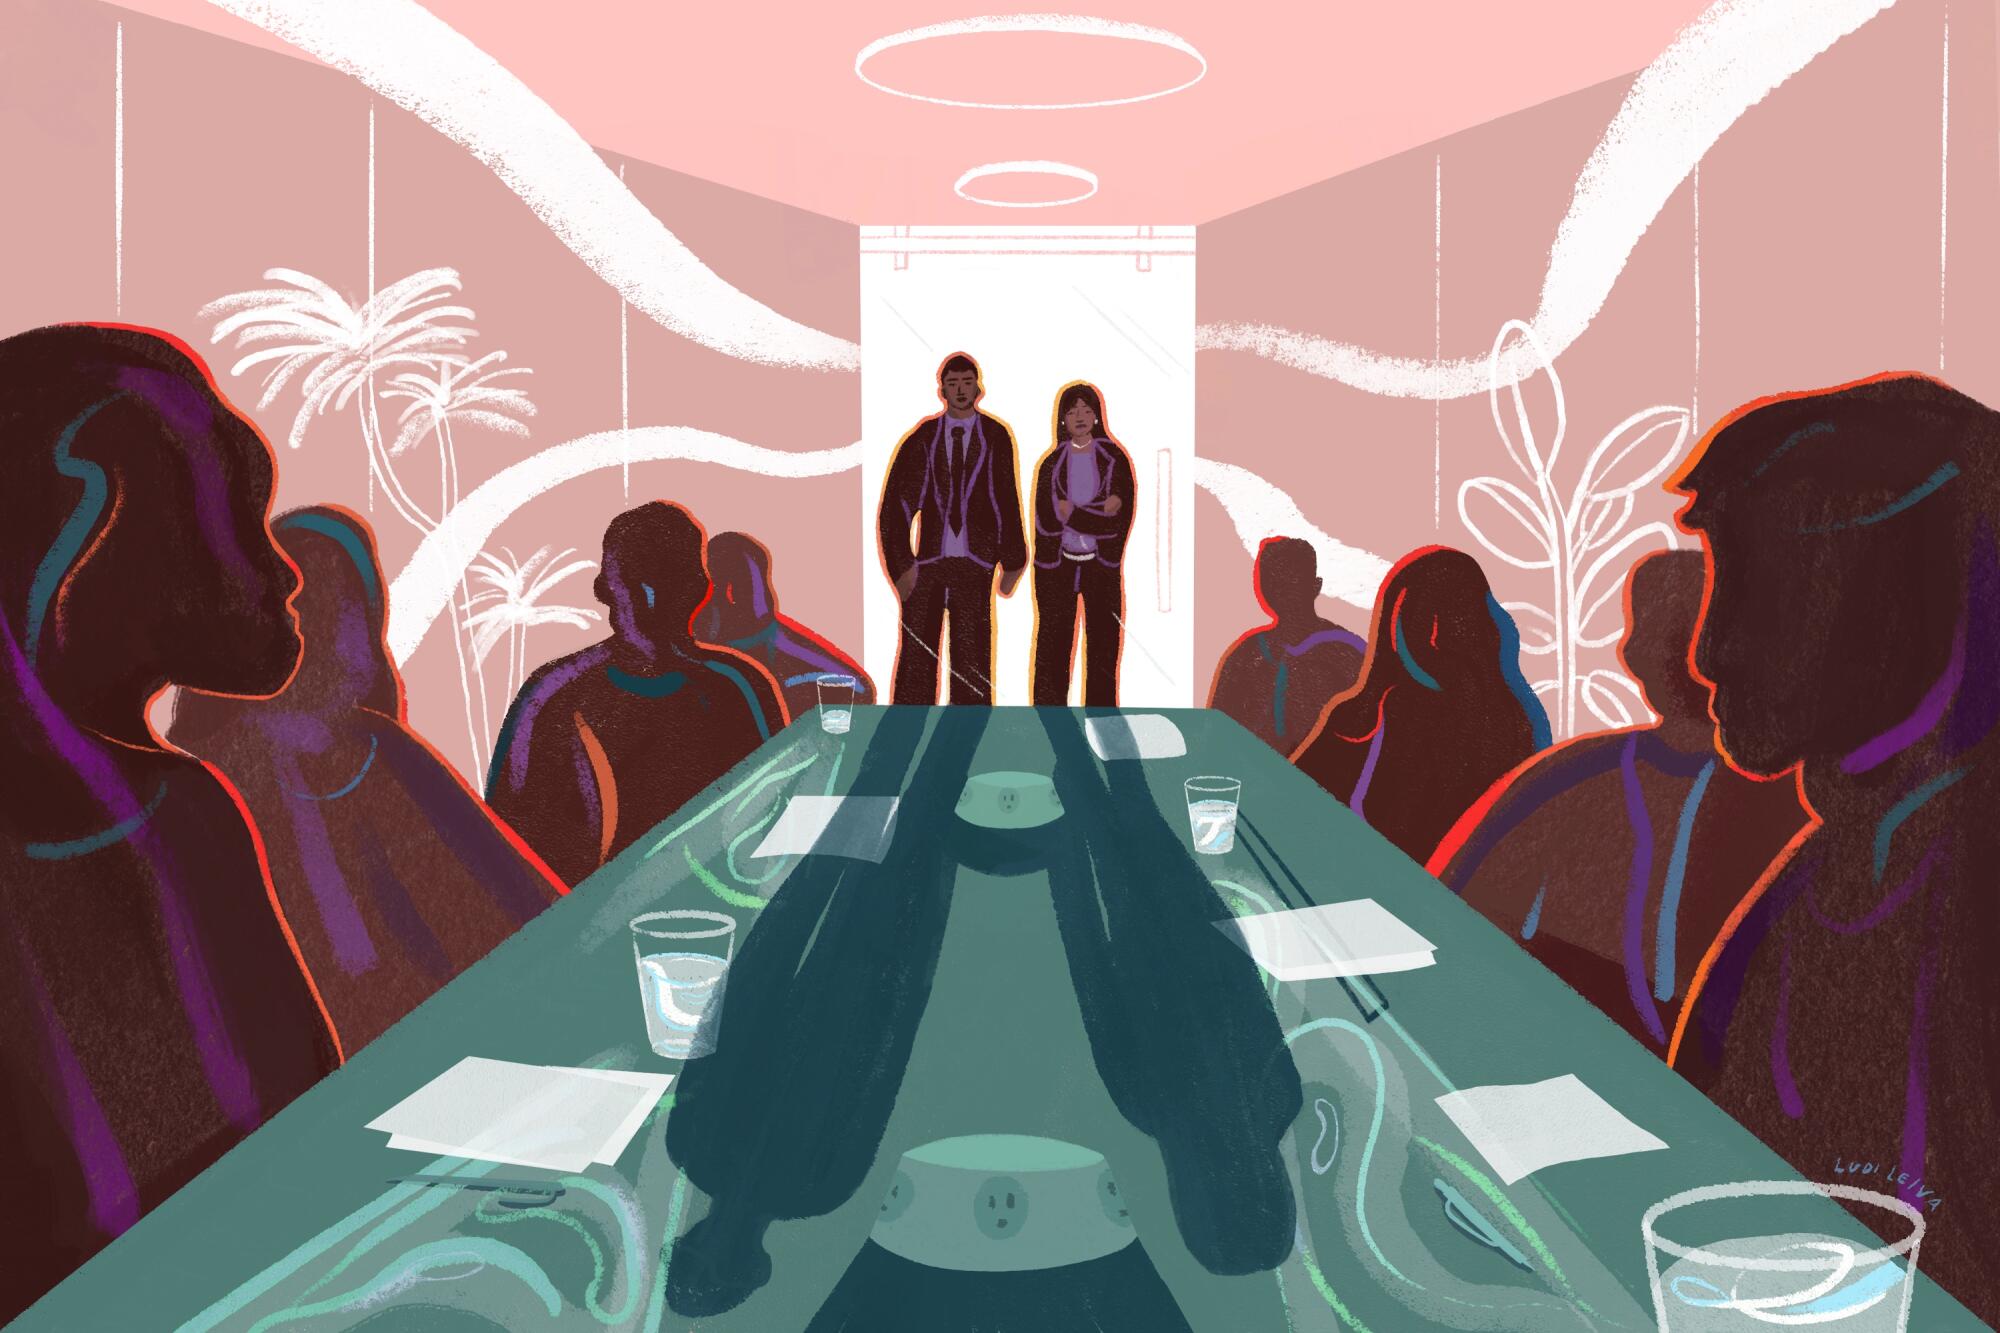 An illustration of people sitting around a long table. Two others stand at the end of the table, looking in from the outside.